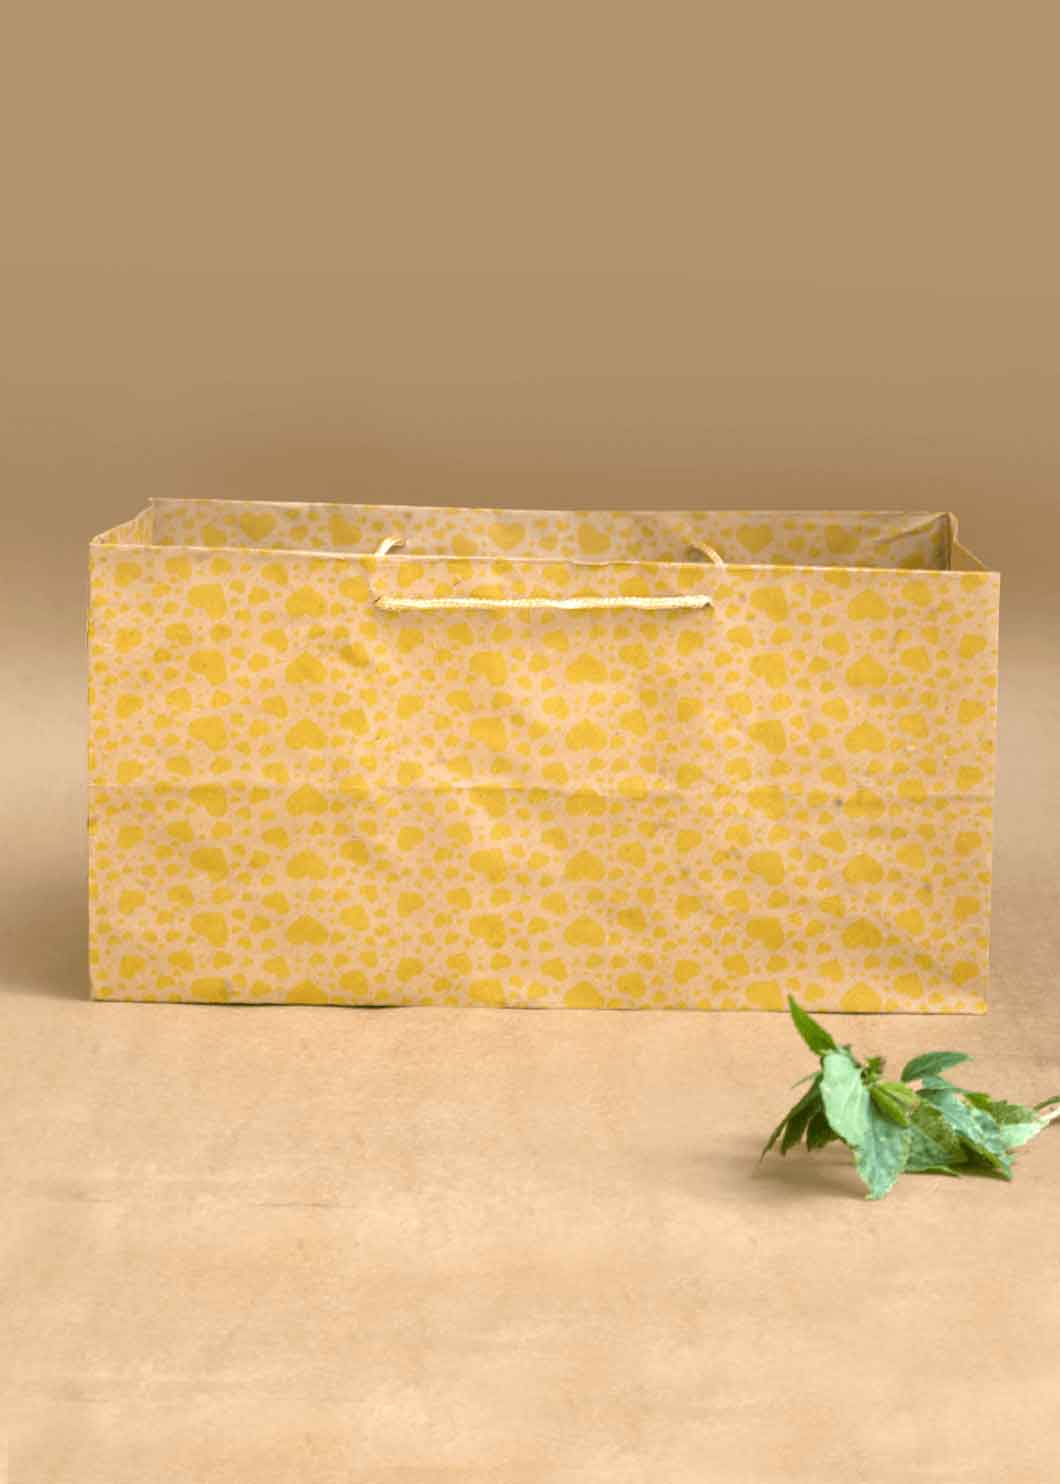 Craft Paper Bag Heart Pattern - Craft Paper Bag - Yellow Silver Red - 14x7 Paper Bag